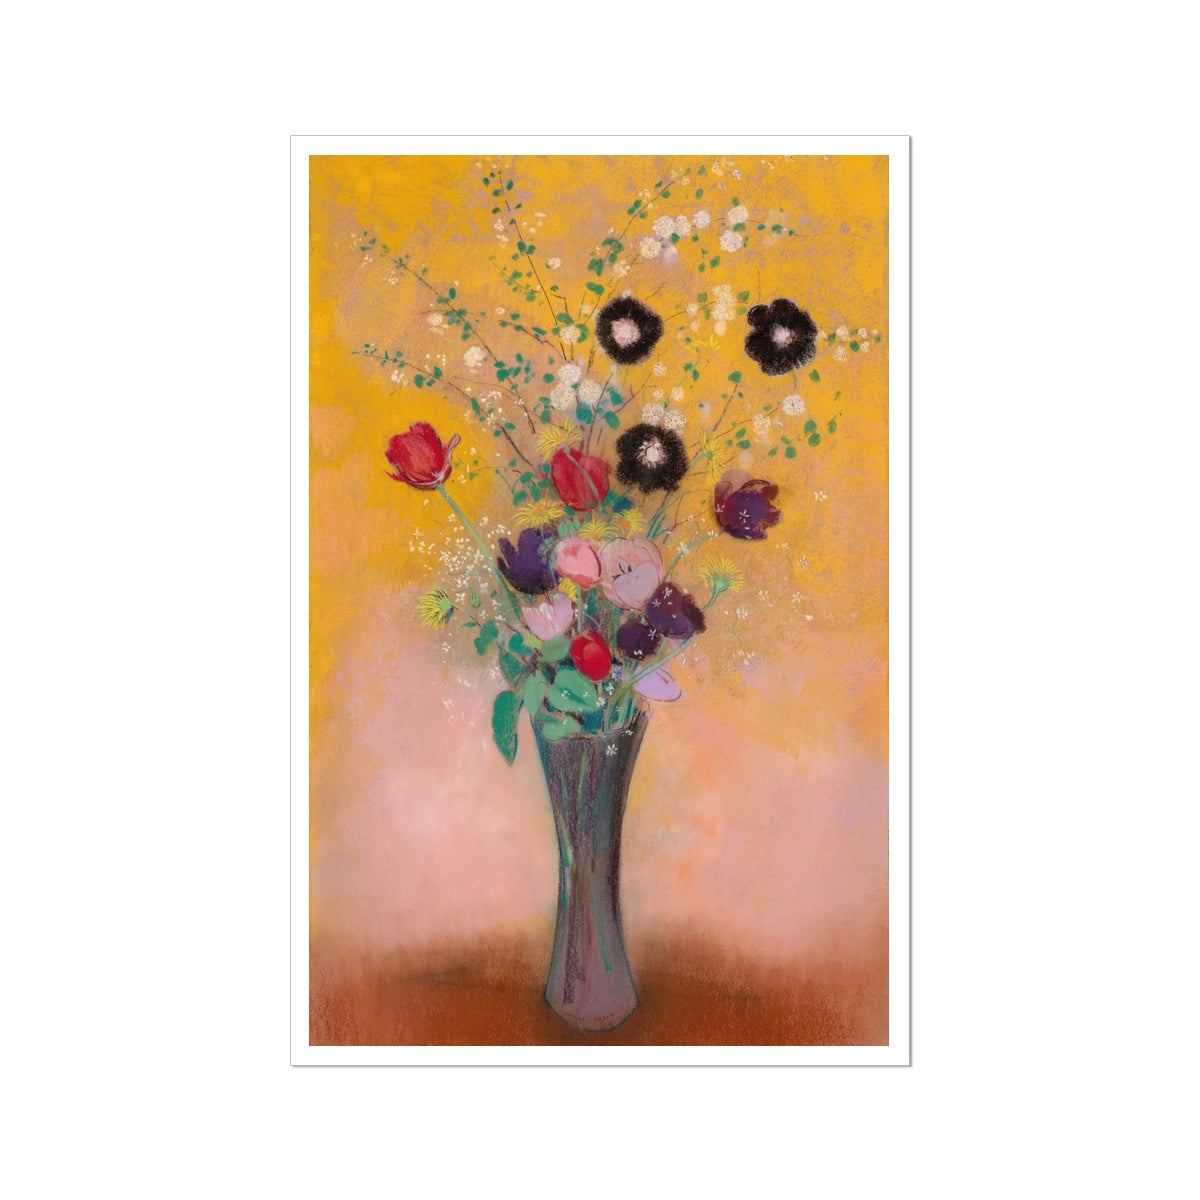 This is a museum-quality open edition art print by the famous artist Odilon Redon featuring the stunning painting and still life 'Vase of Flowers'.